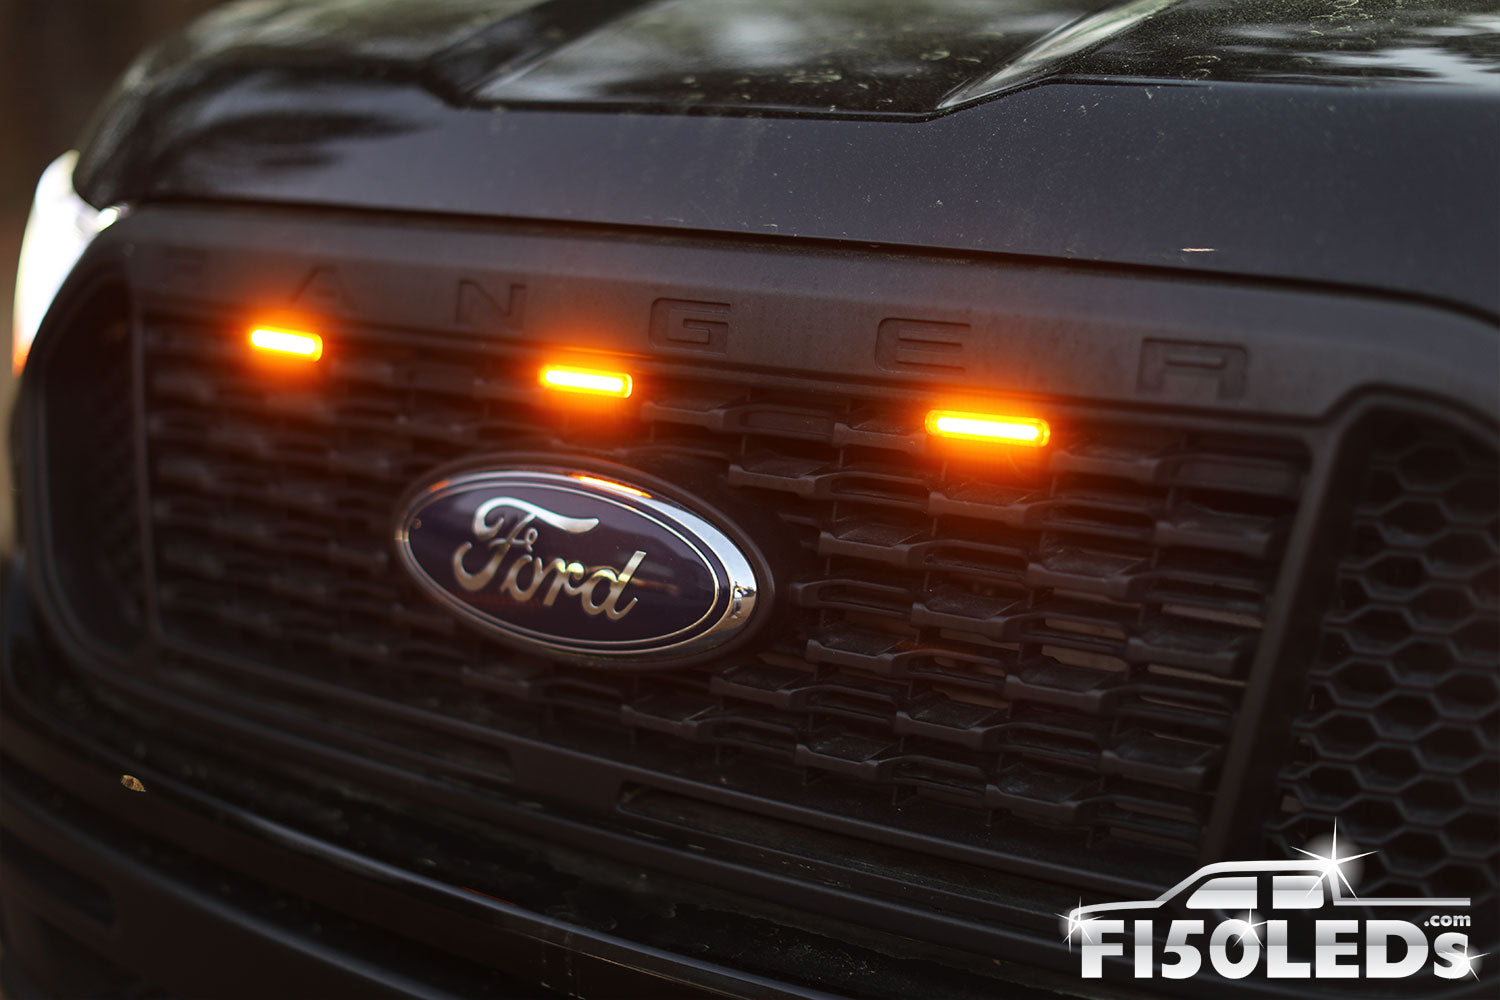 Ford Ranger Accessories - Lights and Styling